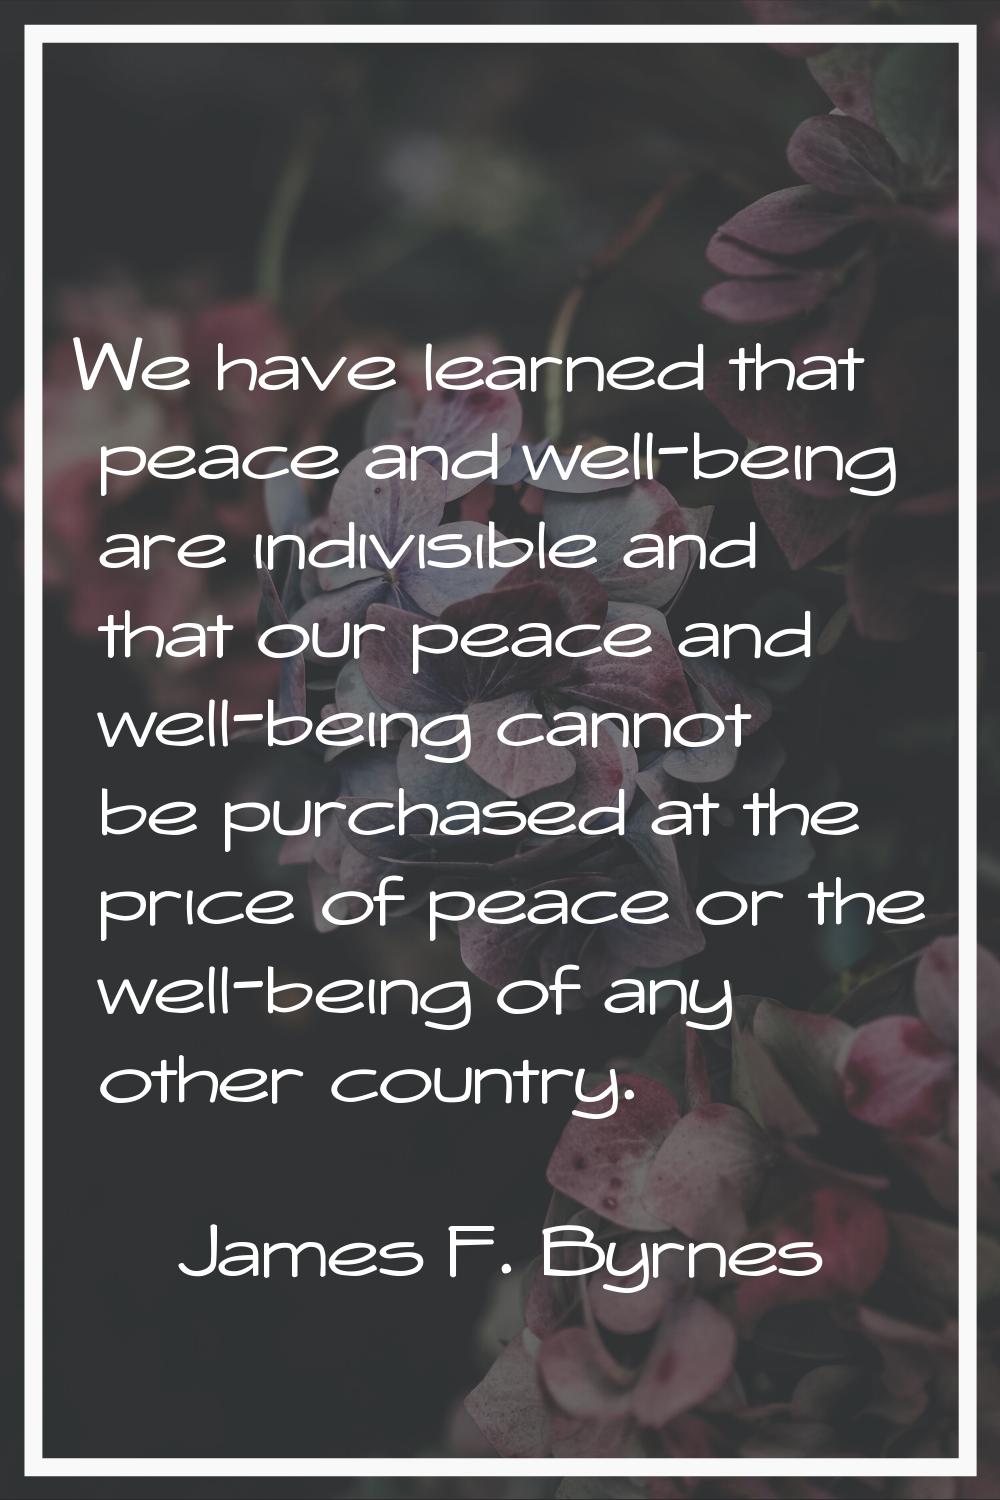 We have learned that peace and well-being are indivisible and that our peace and well-being cannot 